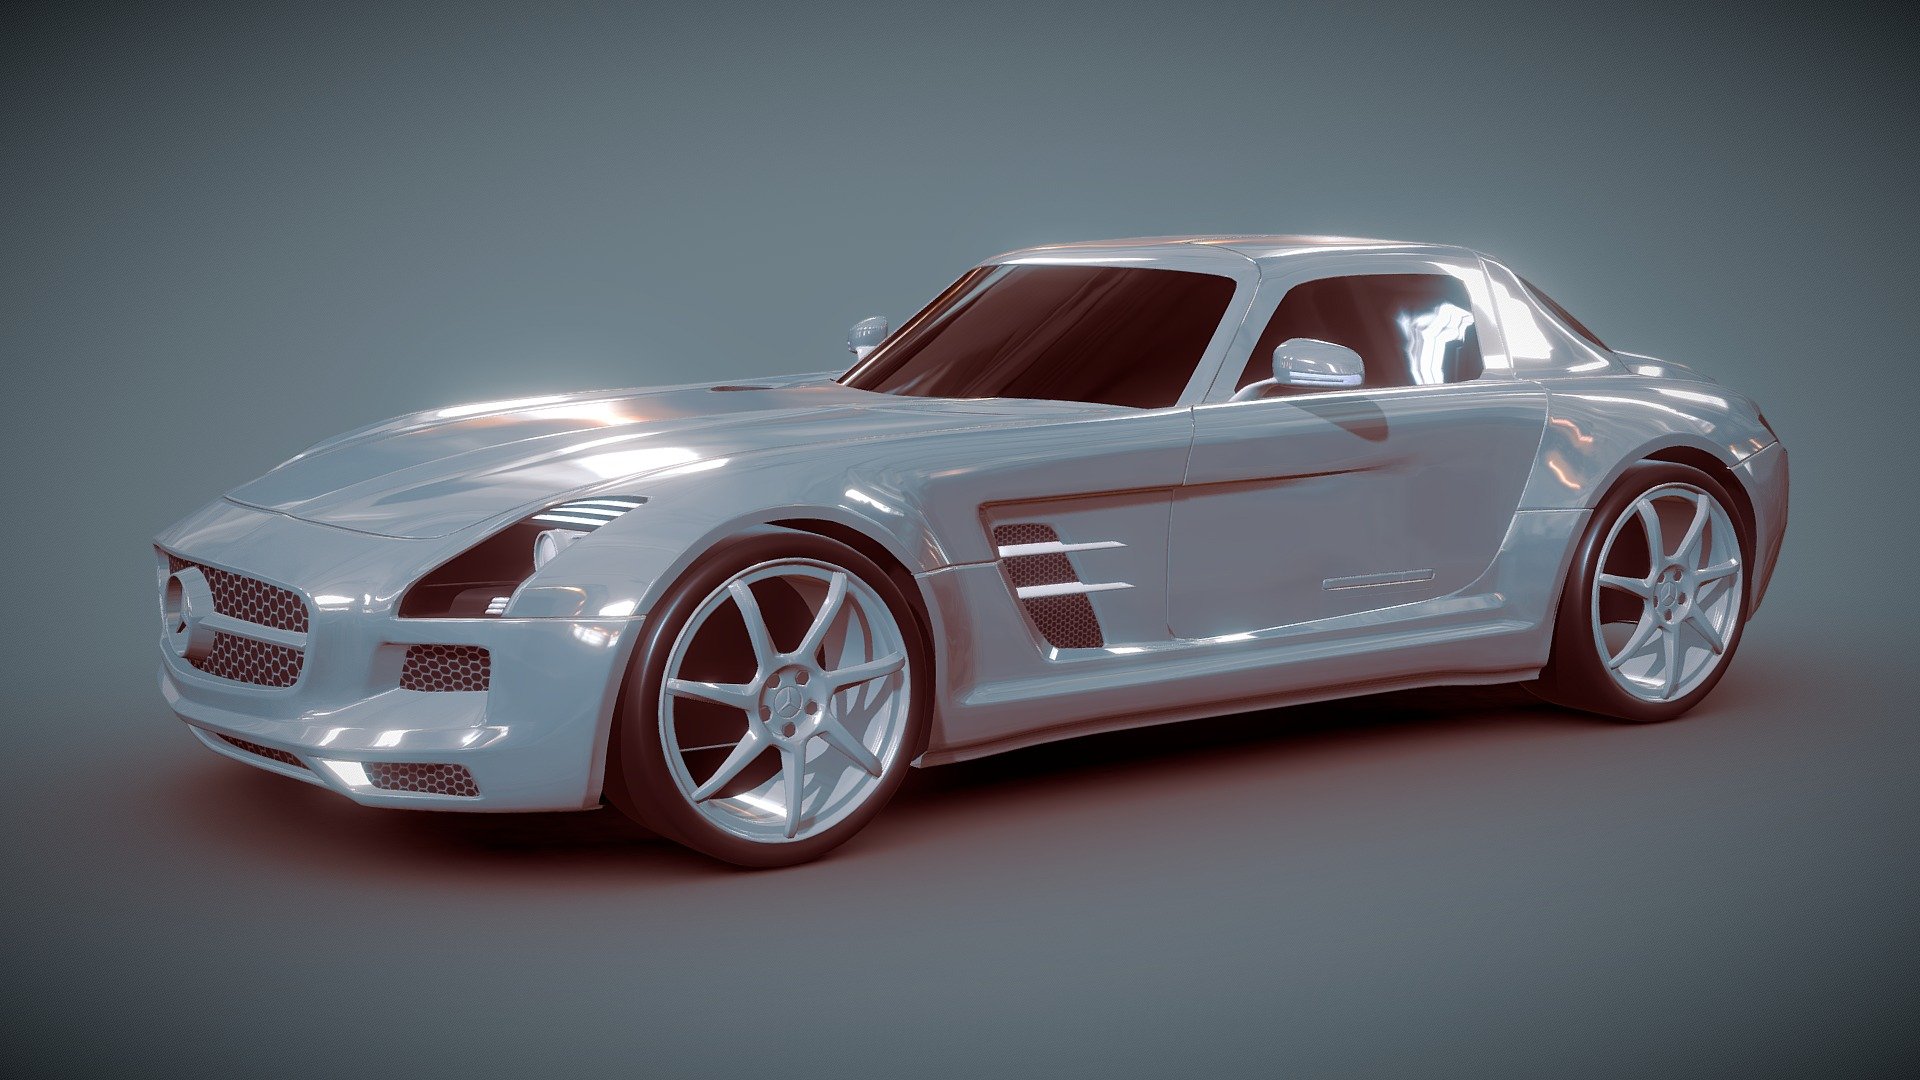 Detailed 3d model of awesome Mercedes Benz SLS AMG luxury supercar. Most of the parts on 3d model were created ing to blueprints and images I found via internet.

Detailed 3d model created with blender 3d 2.65.Rendering preview images with blender internal render and with standard light setting. Product is packed with subdivision1, until the image previews were rendered with 2 subdivisions. There are 2 png textures one is for grills and air intakes and second is for tail lights. Most of the object are detached,but you can easy unlink wheel and rims for example if you need it.Light group for the front and rear part of the car were created with polygons too.There are no interior objects for this product.Objects are named by objects and materials. Enjoy my product.

3ds file
verts:428712
polys:142904

obj file
verts:80205
polys:149328 - Mercedes SLS AMG supercar 2011 - 3D model by koleos3d 3d model